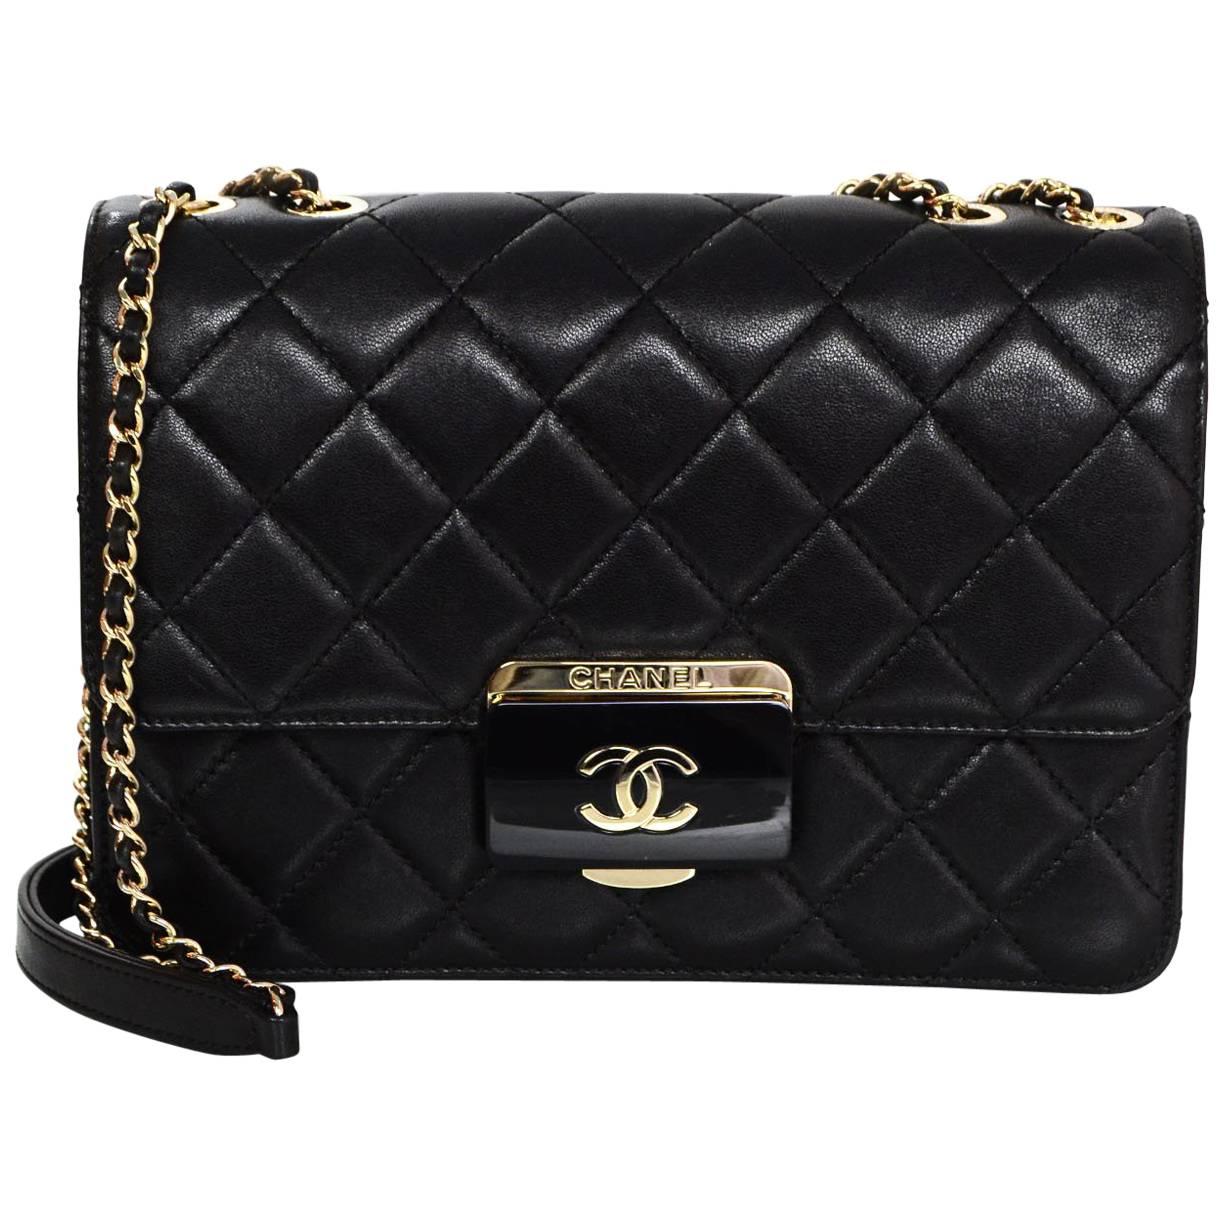 Chanel 2016 Black Quilted Sheepskin Large Beauty Lock Flap Bag rt. $3, 800